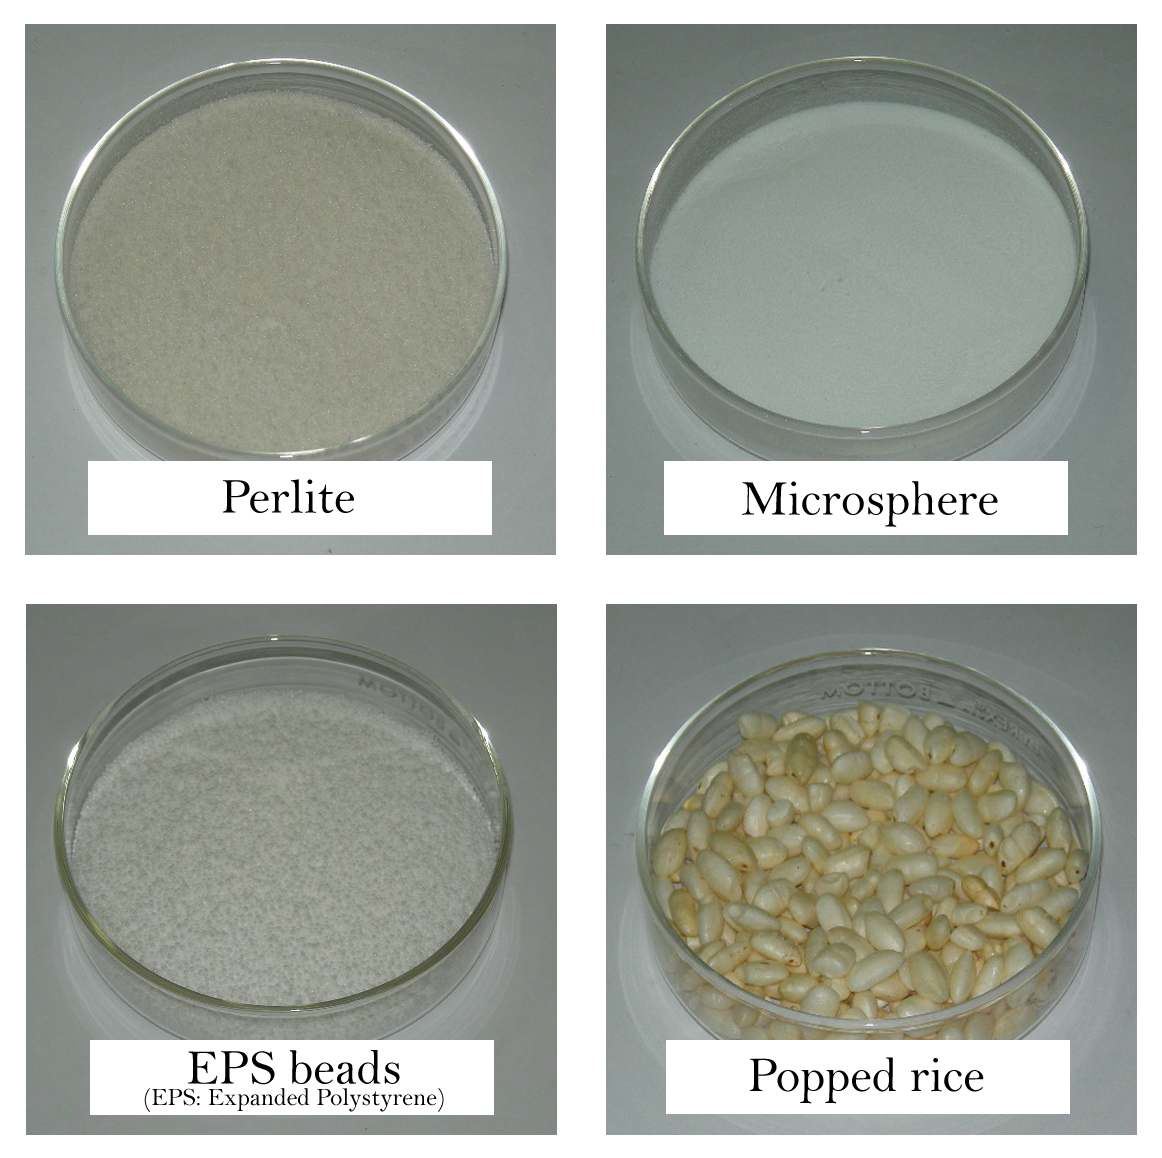 Insulation materials used for experiments